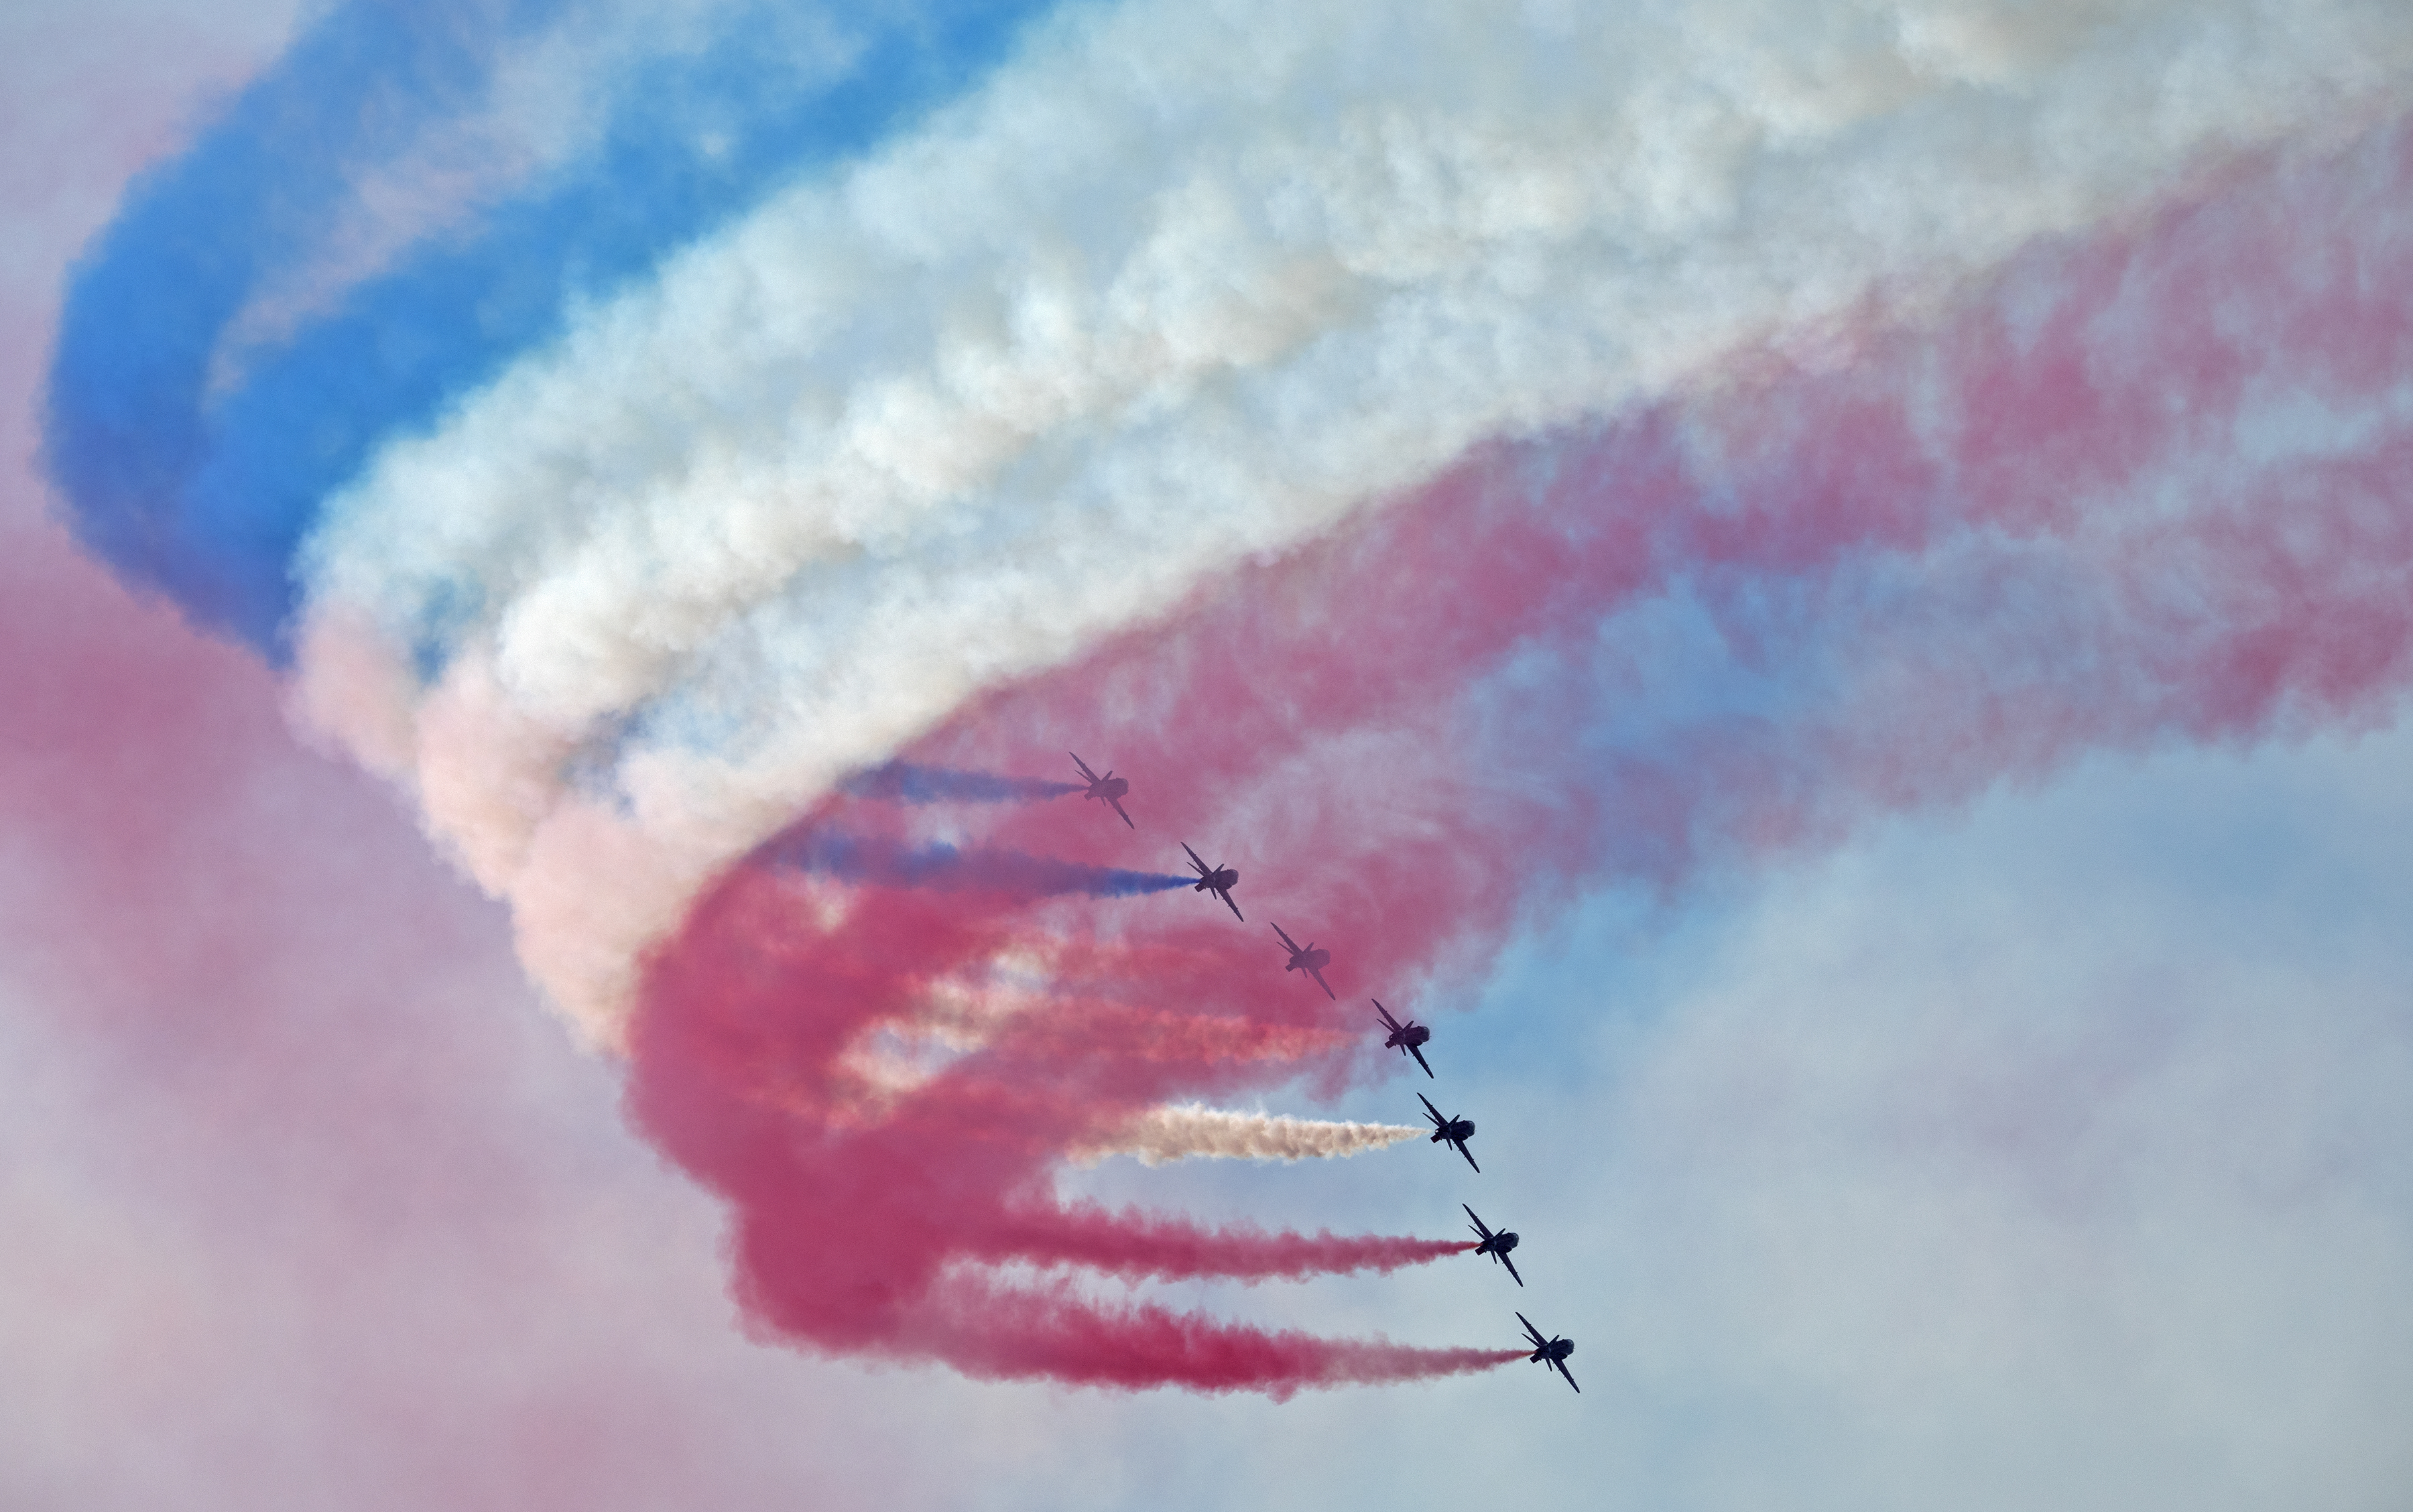 The Red Arrows have attained Public Display Authority for 2022.